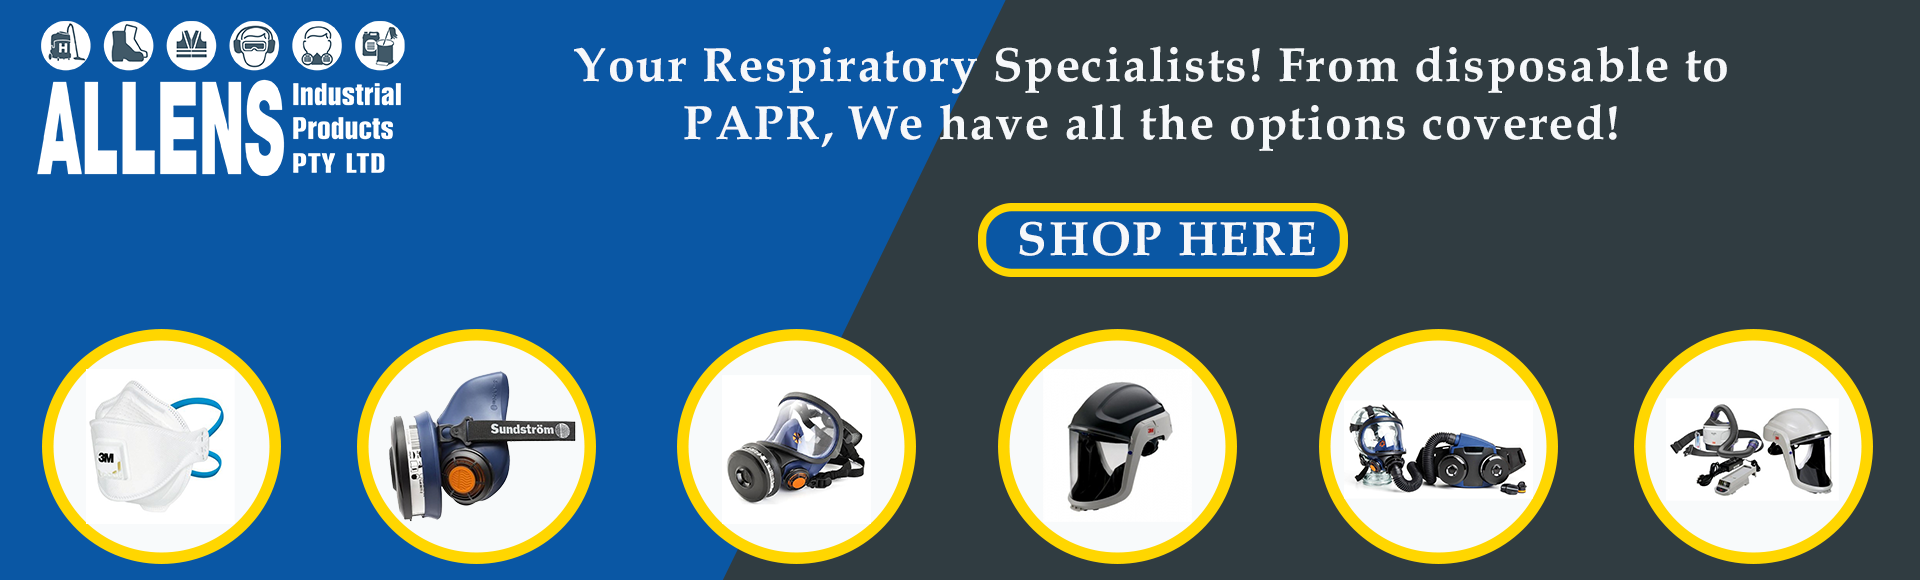 Allens Industrial Products the respirator specialists